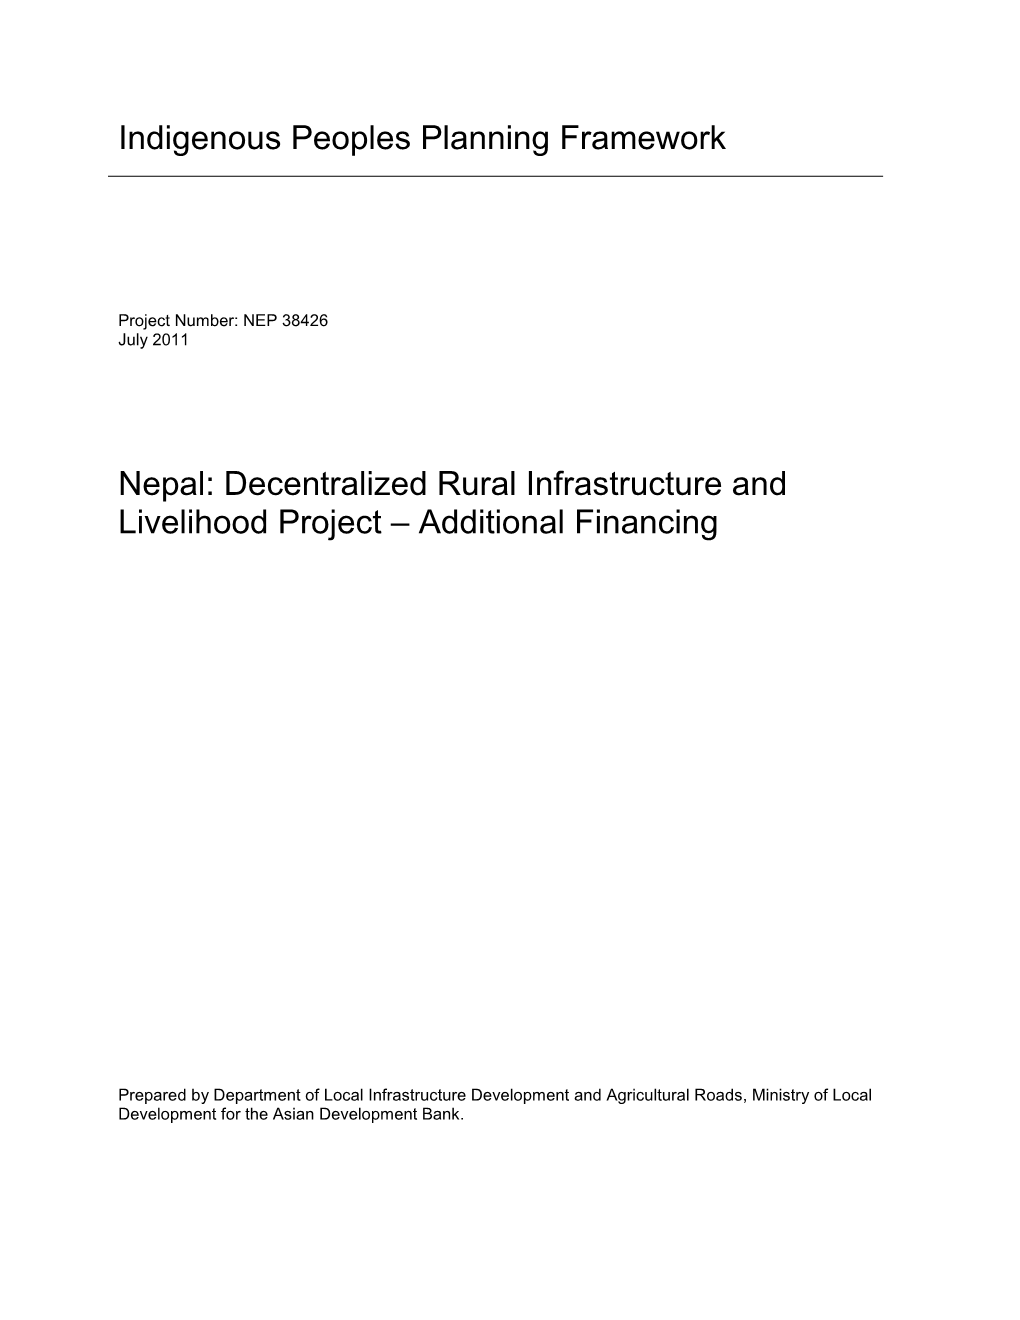 IPPF: Nepal: Decentralized Rural Infrastructure and Livelihood Project